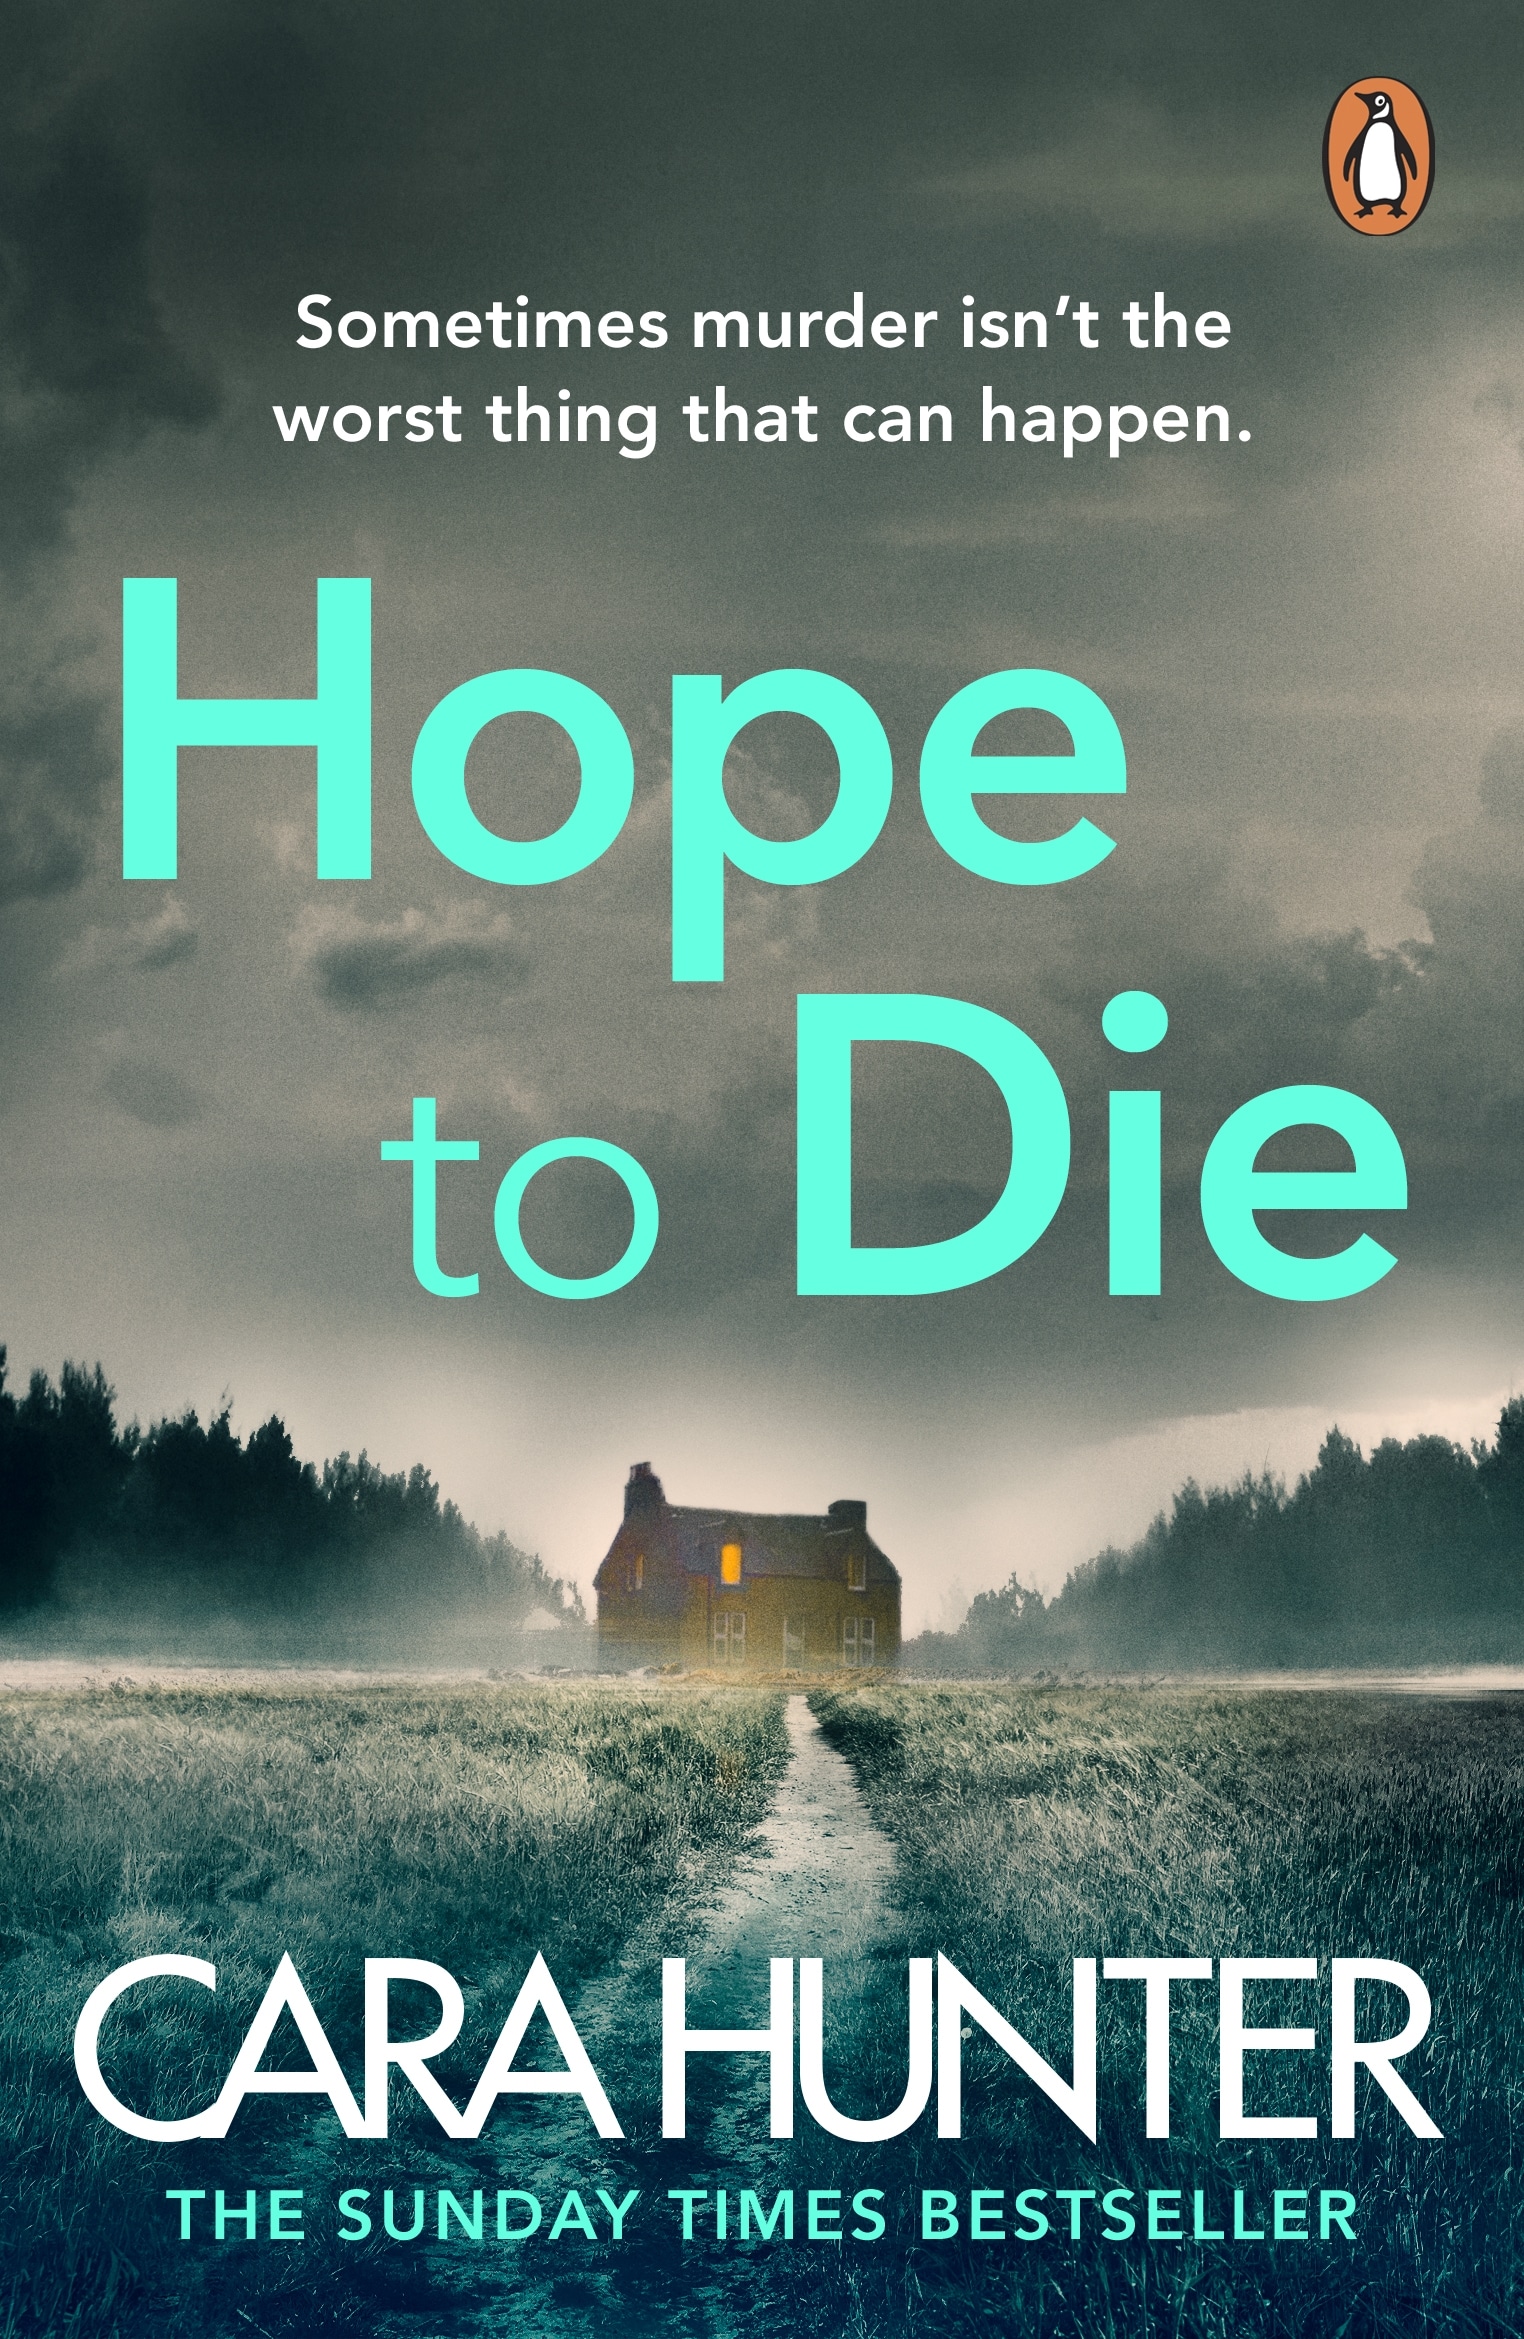 Book cover of Hope to Die by Cara Hunter, book 6 in the DI Adam Fawley series